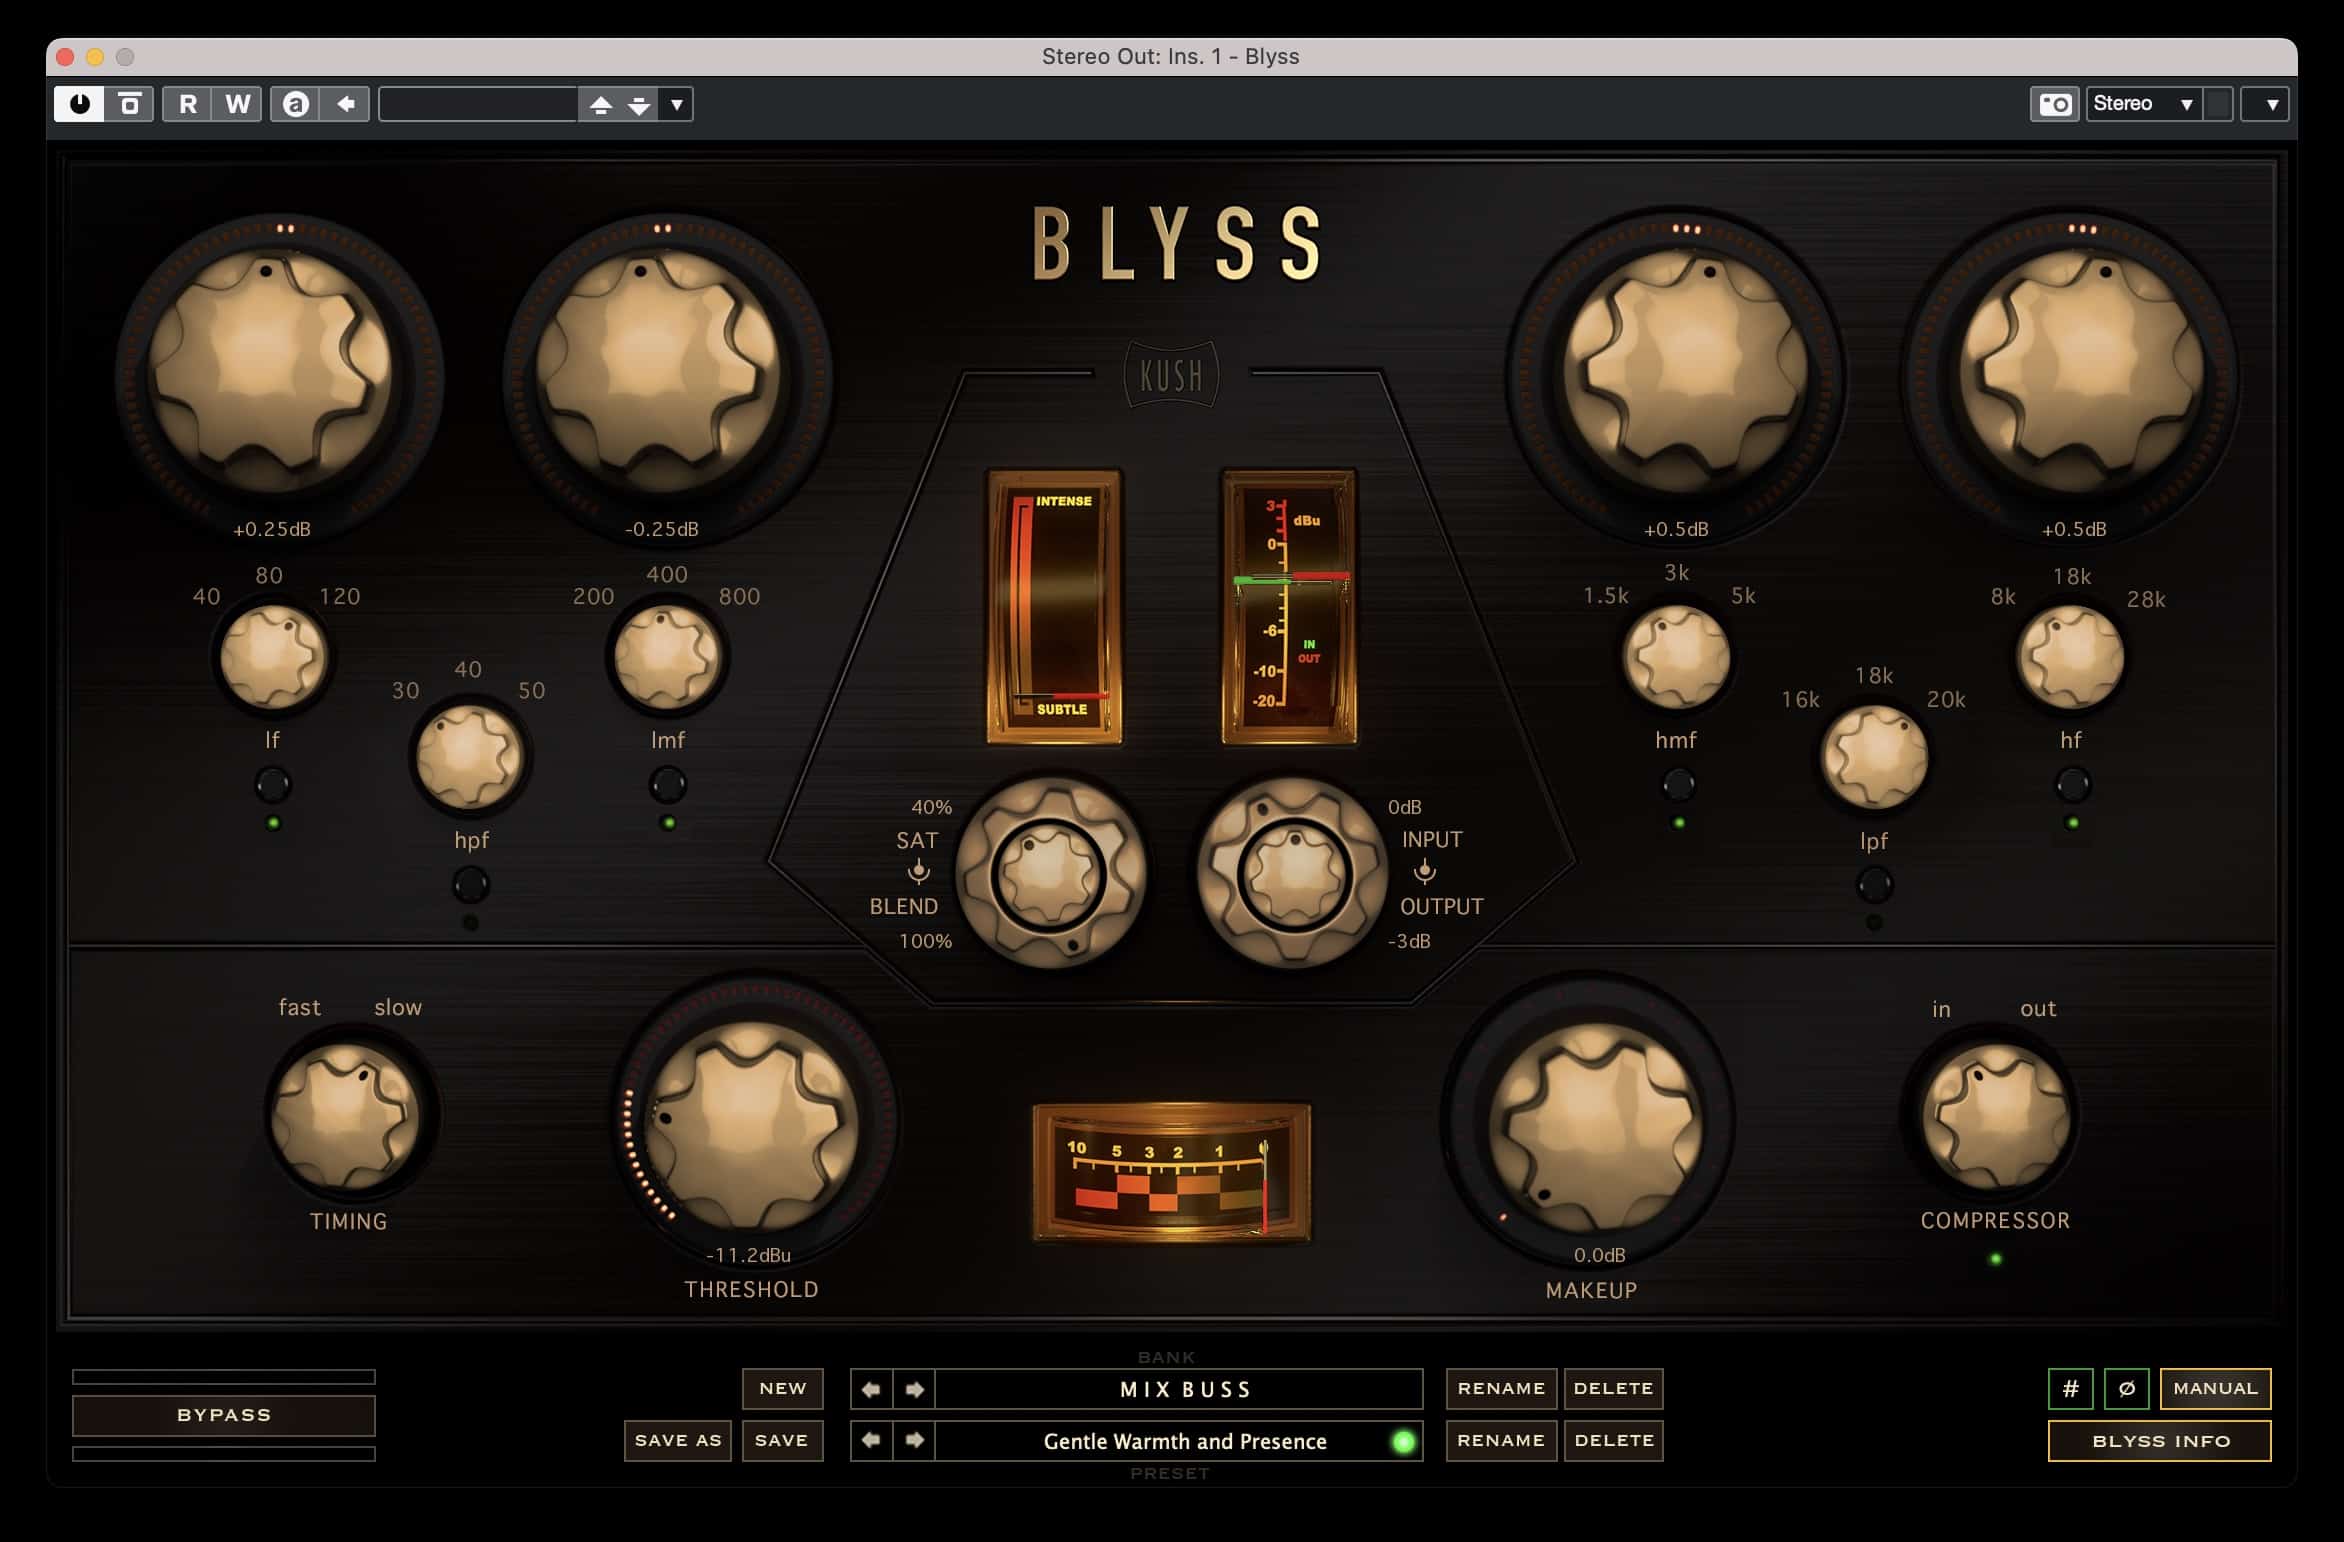 Review of Kush Audio’s Blyss EQ for Mastering with an Analog Vibe